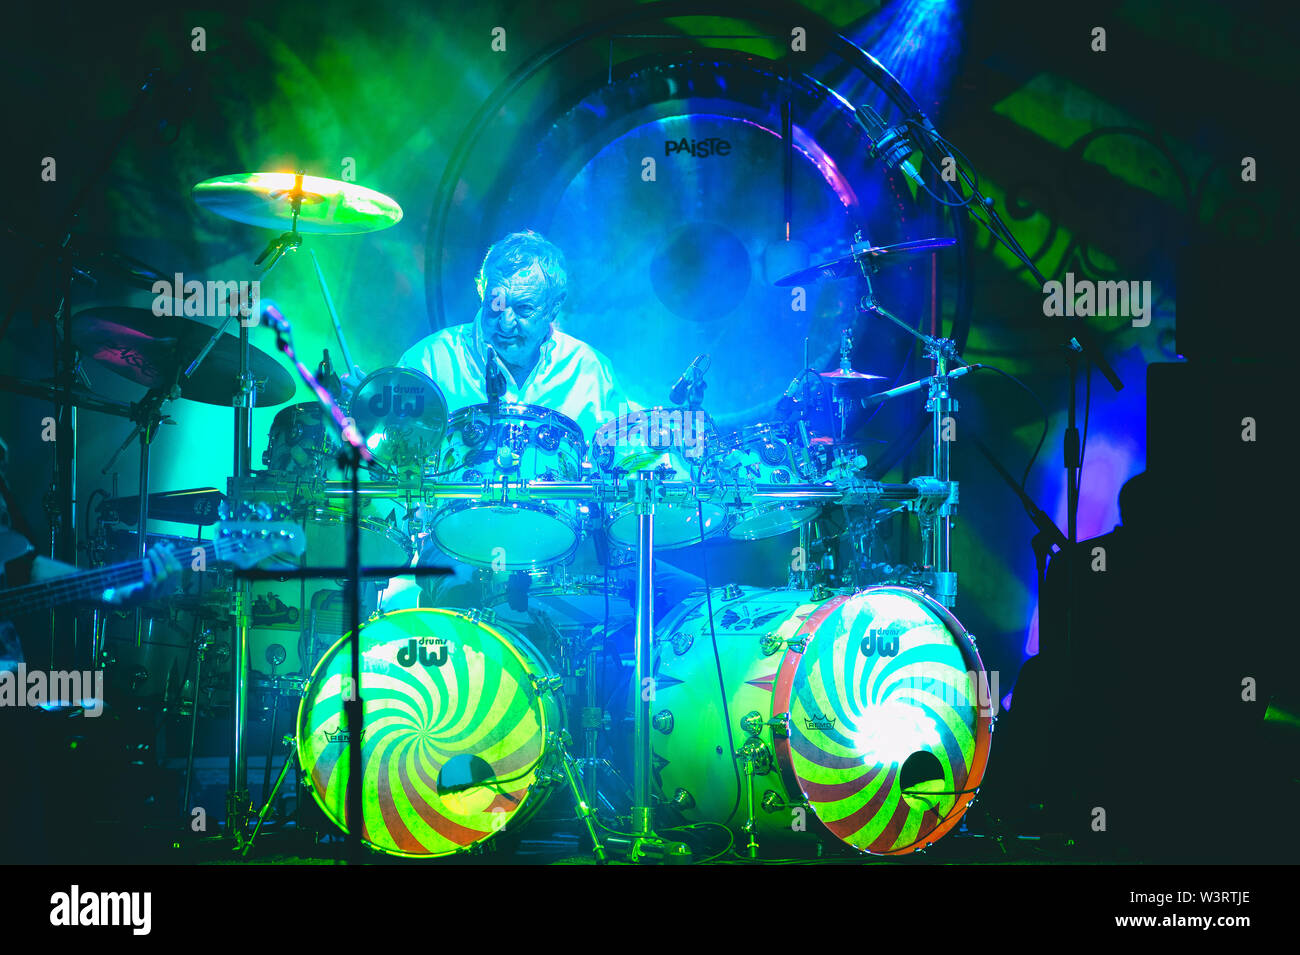 Roma, Italy. 16th July, 2019. Nick Mason's Saucerful Of Secrets, the band led by Pink Floyd drummer, on tour this summer in Italy.Nick Mason's Saucerful Of Secrets are formed by Nick Mason, Gary Kemp, Guy Pratt, Lee Harris and Dom Beken. The concerts celebrate the first Pink Floyd musical works and include songs taken from the albums 'The Piper At The Gates of Dawn' and 'A Saucerful Of Secrets'. Credit: Fabrizio Di Bitonto/Pacific Press/Alamy Live News Stock Photo